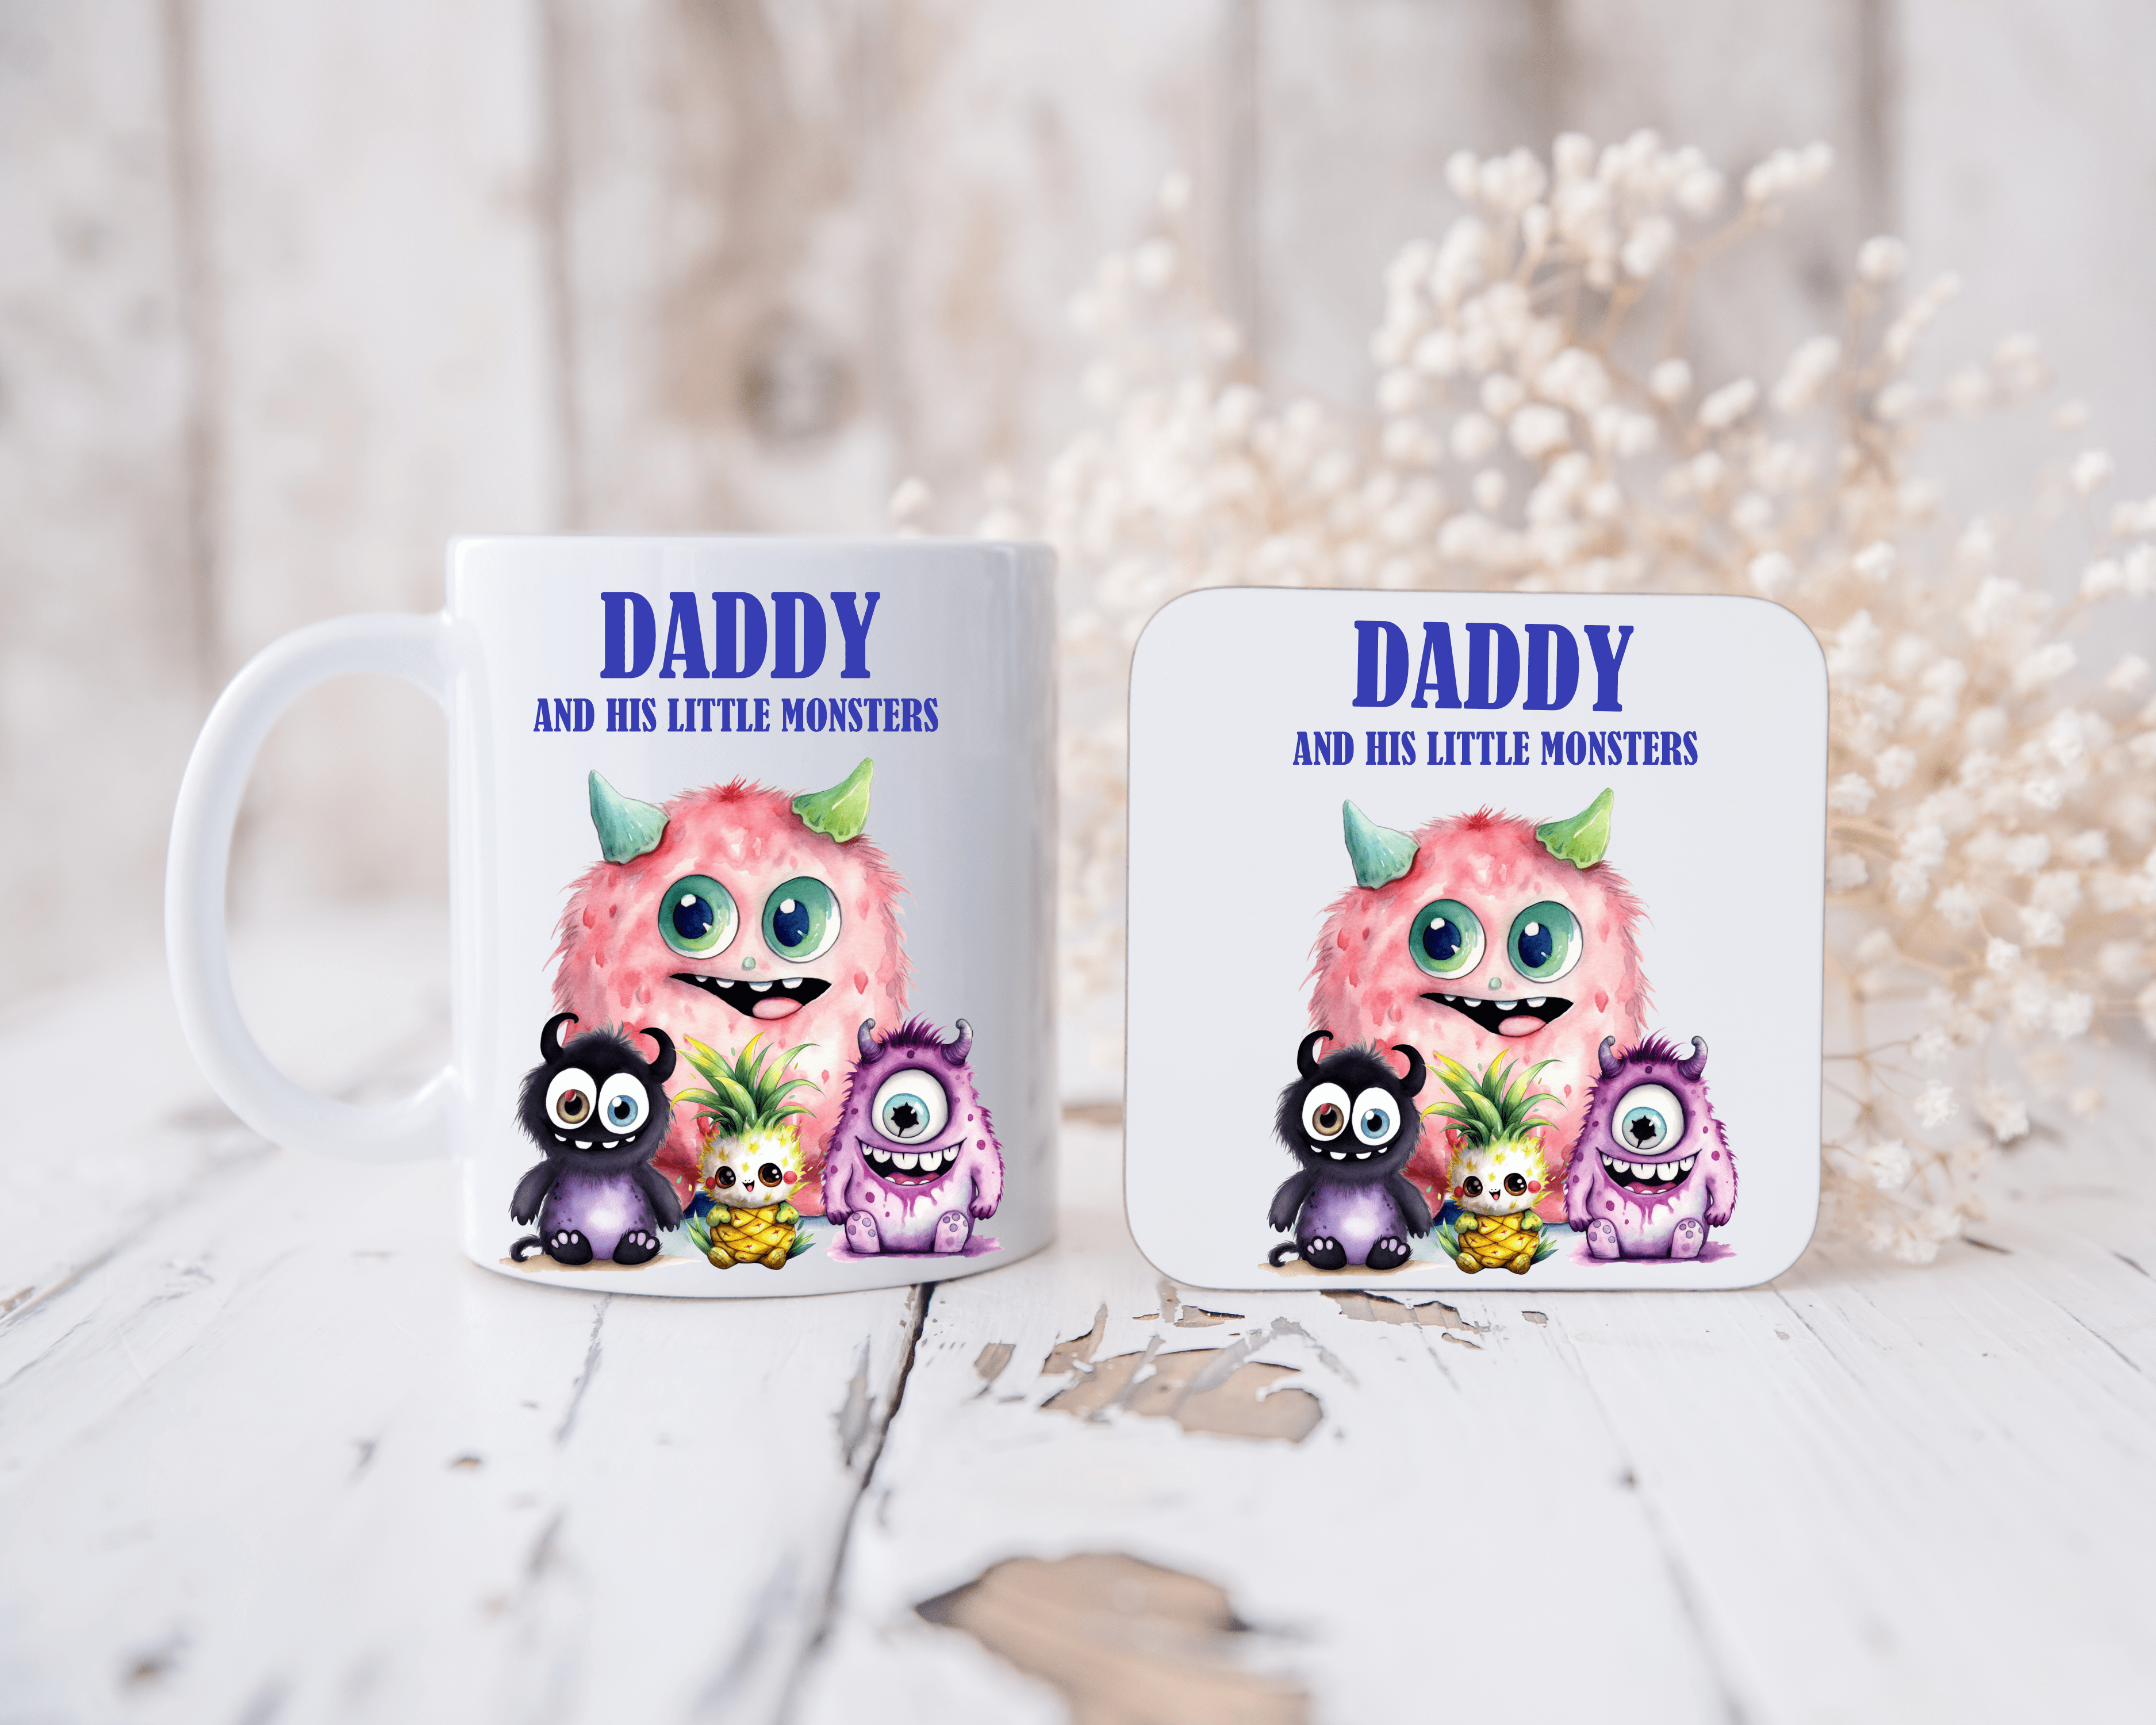 Daddy and His Little Monsters Mug and Coaster